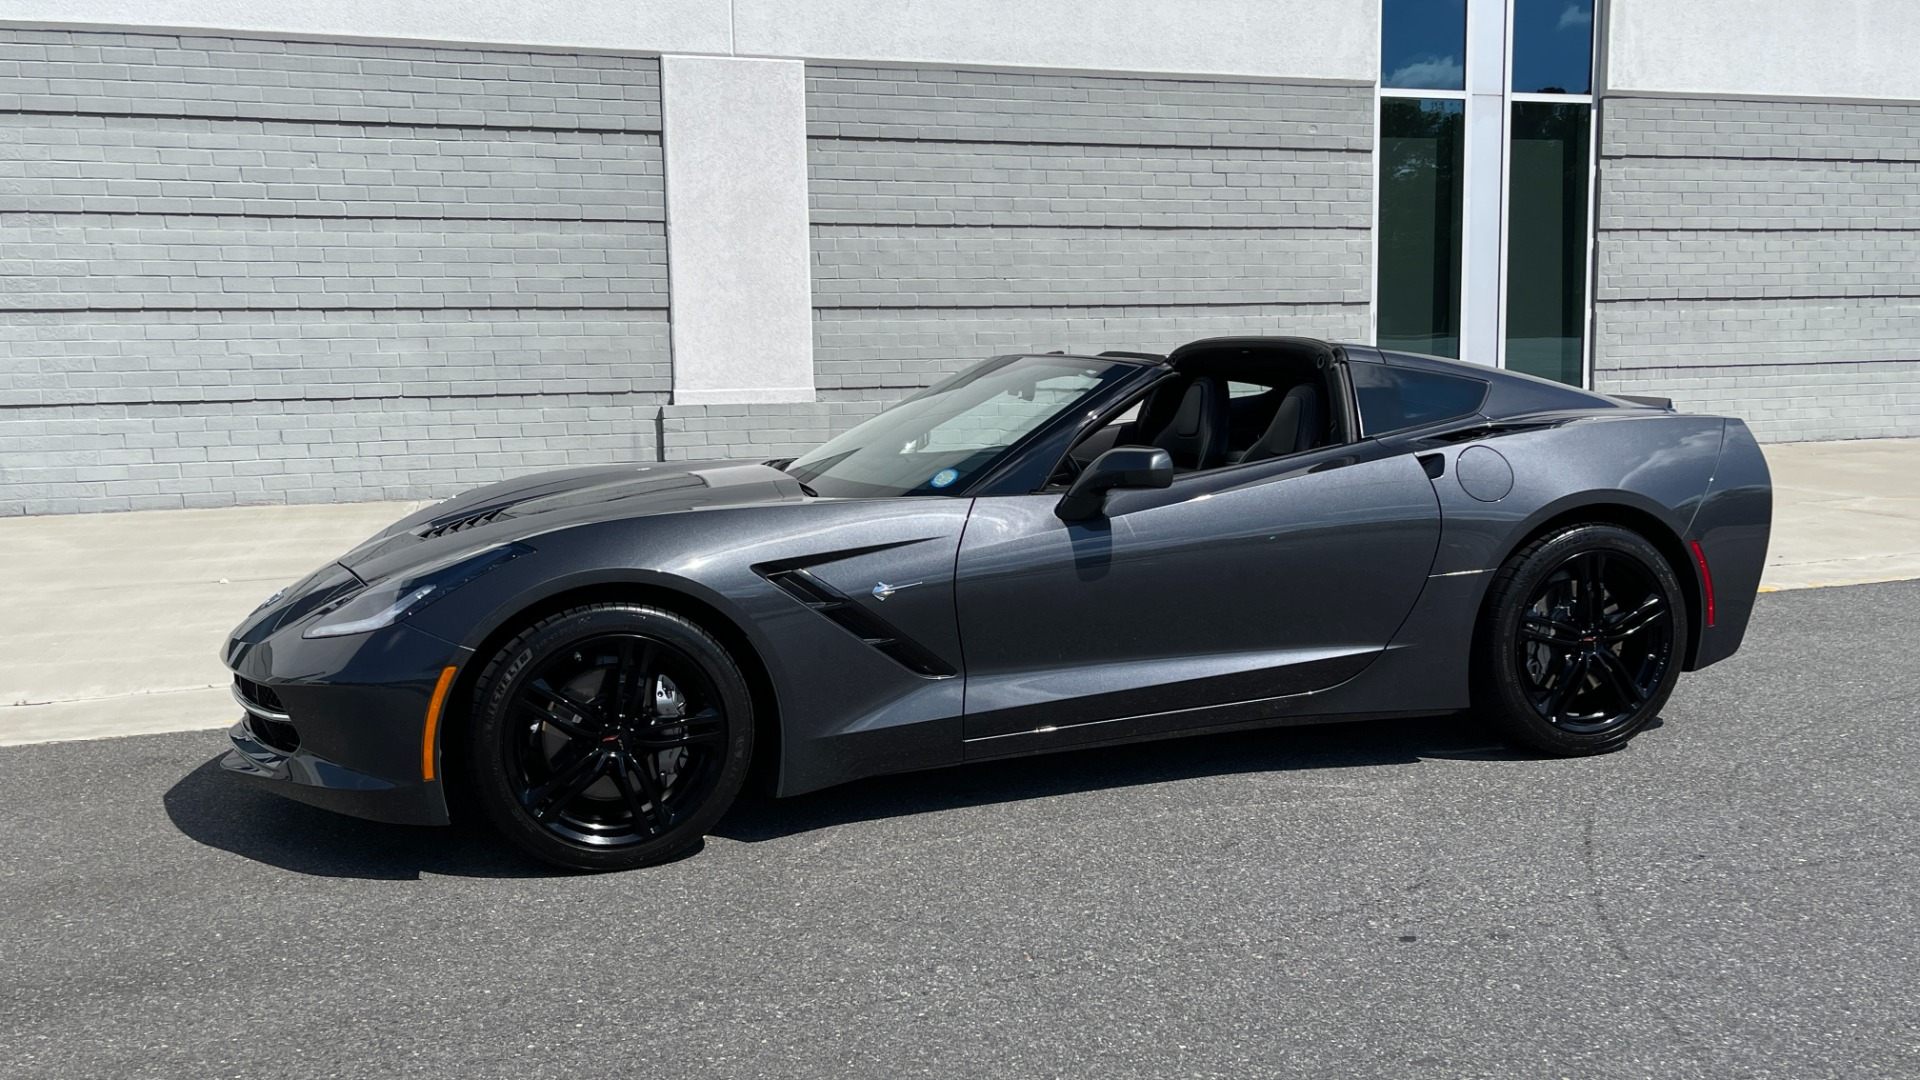 Used 2017 Chevrolet Corvette 1LT / 8SPD AUTO / 6.2L V8 / REMOTE START / PADDLE SHIFTERS for sale $52,995 at Formula Imports in Charlotte NC 28227 2